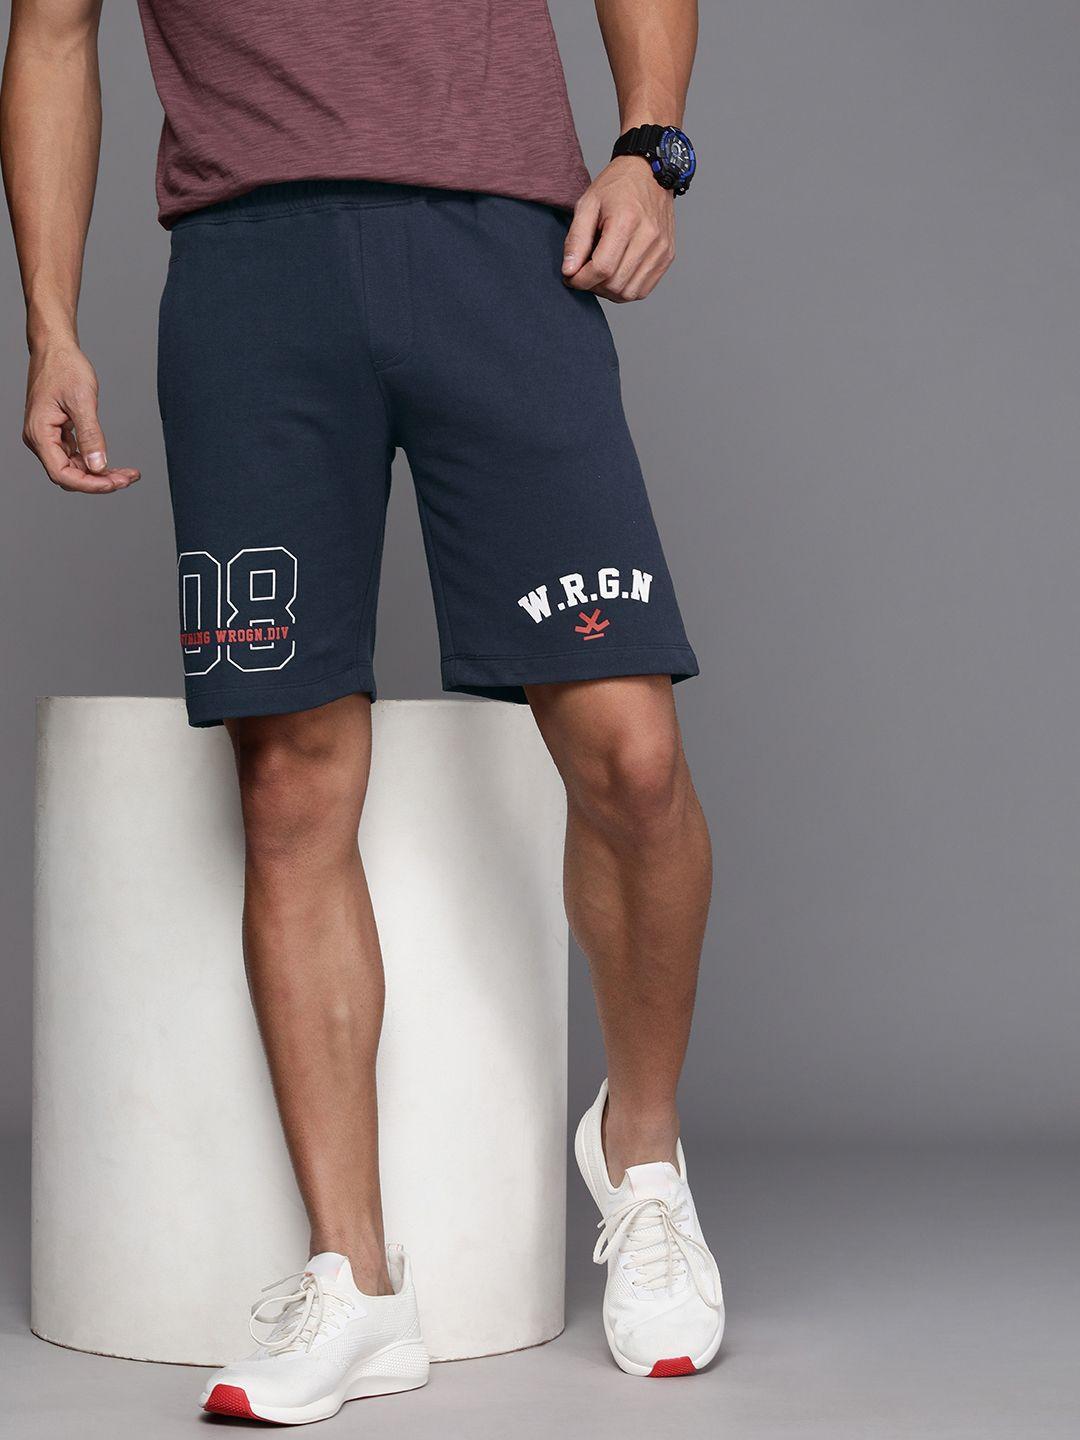 wrogn men navy typography printed mid rise above knee shorts